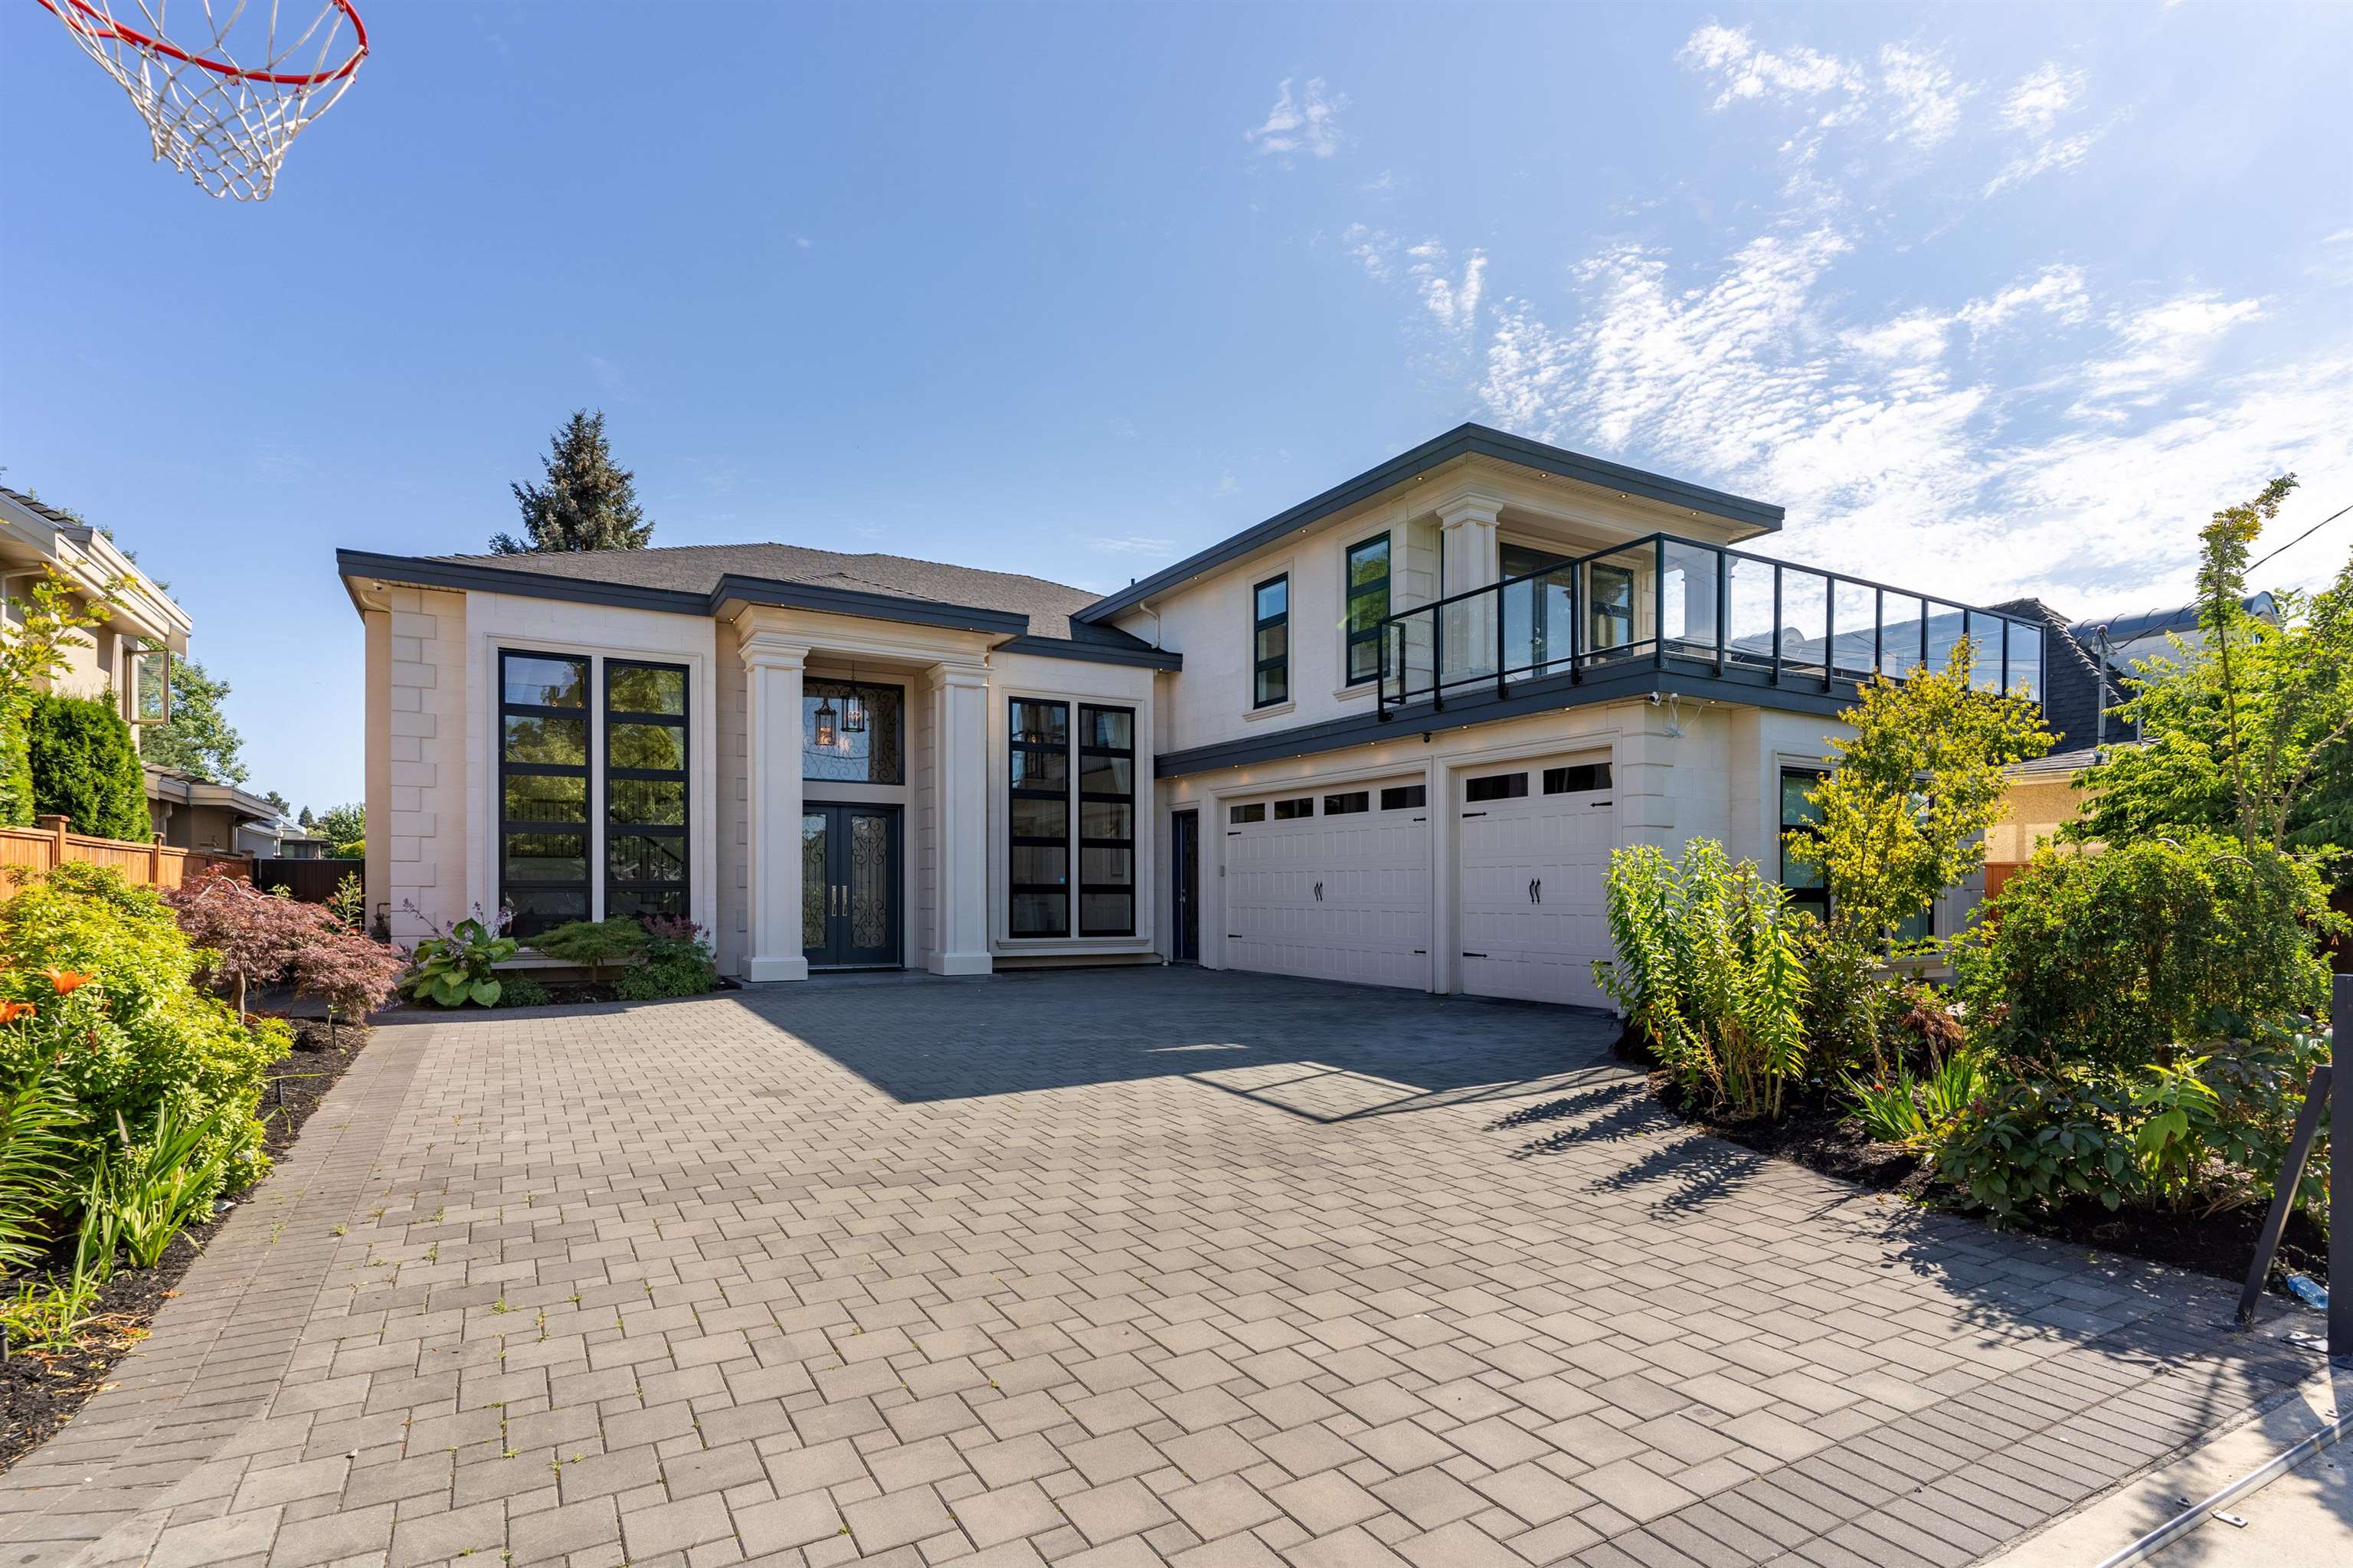 Michael Sung, 7560 PETTS ROAD, Richmond, British Columbia V7A 1J7, 5 Bedrooms, 6 Bathrooms, Residential Detached,For Sale ,R2840032